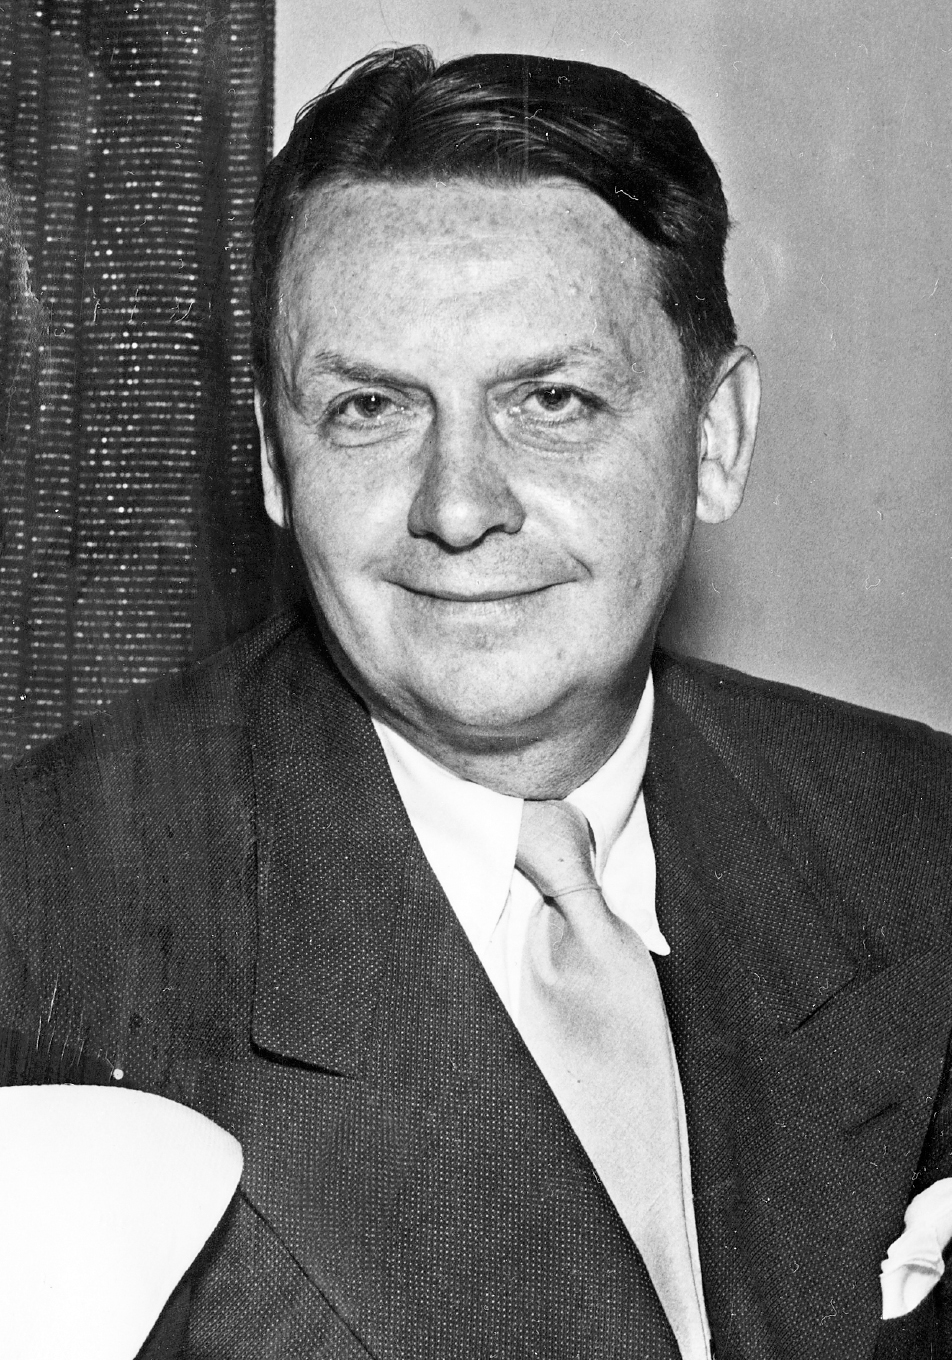 Eliot Ness in the 1950s Cleveland Public Library Photograph Collection - photo 1